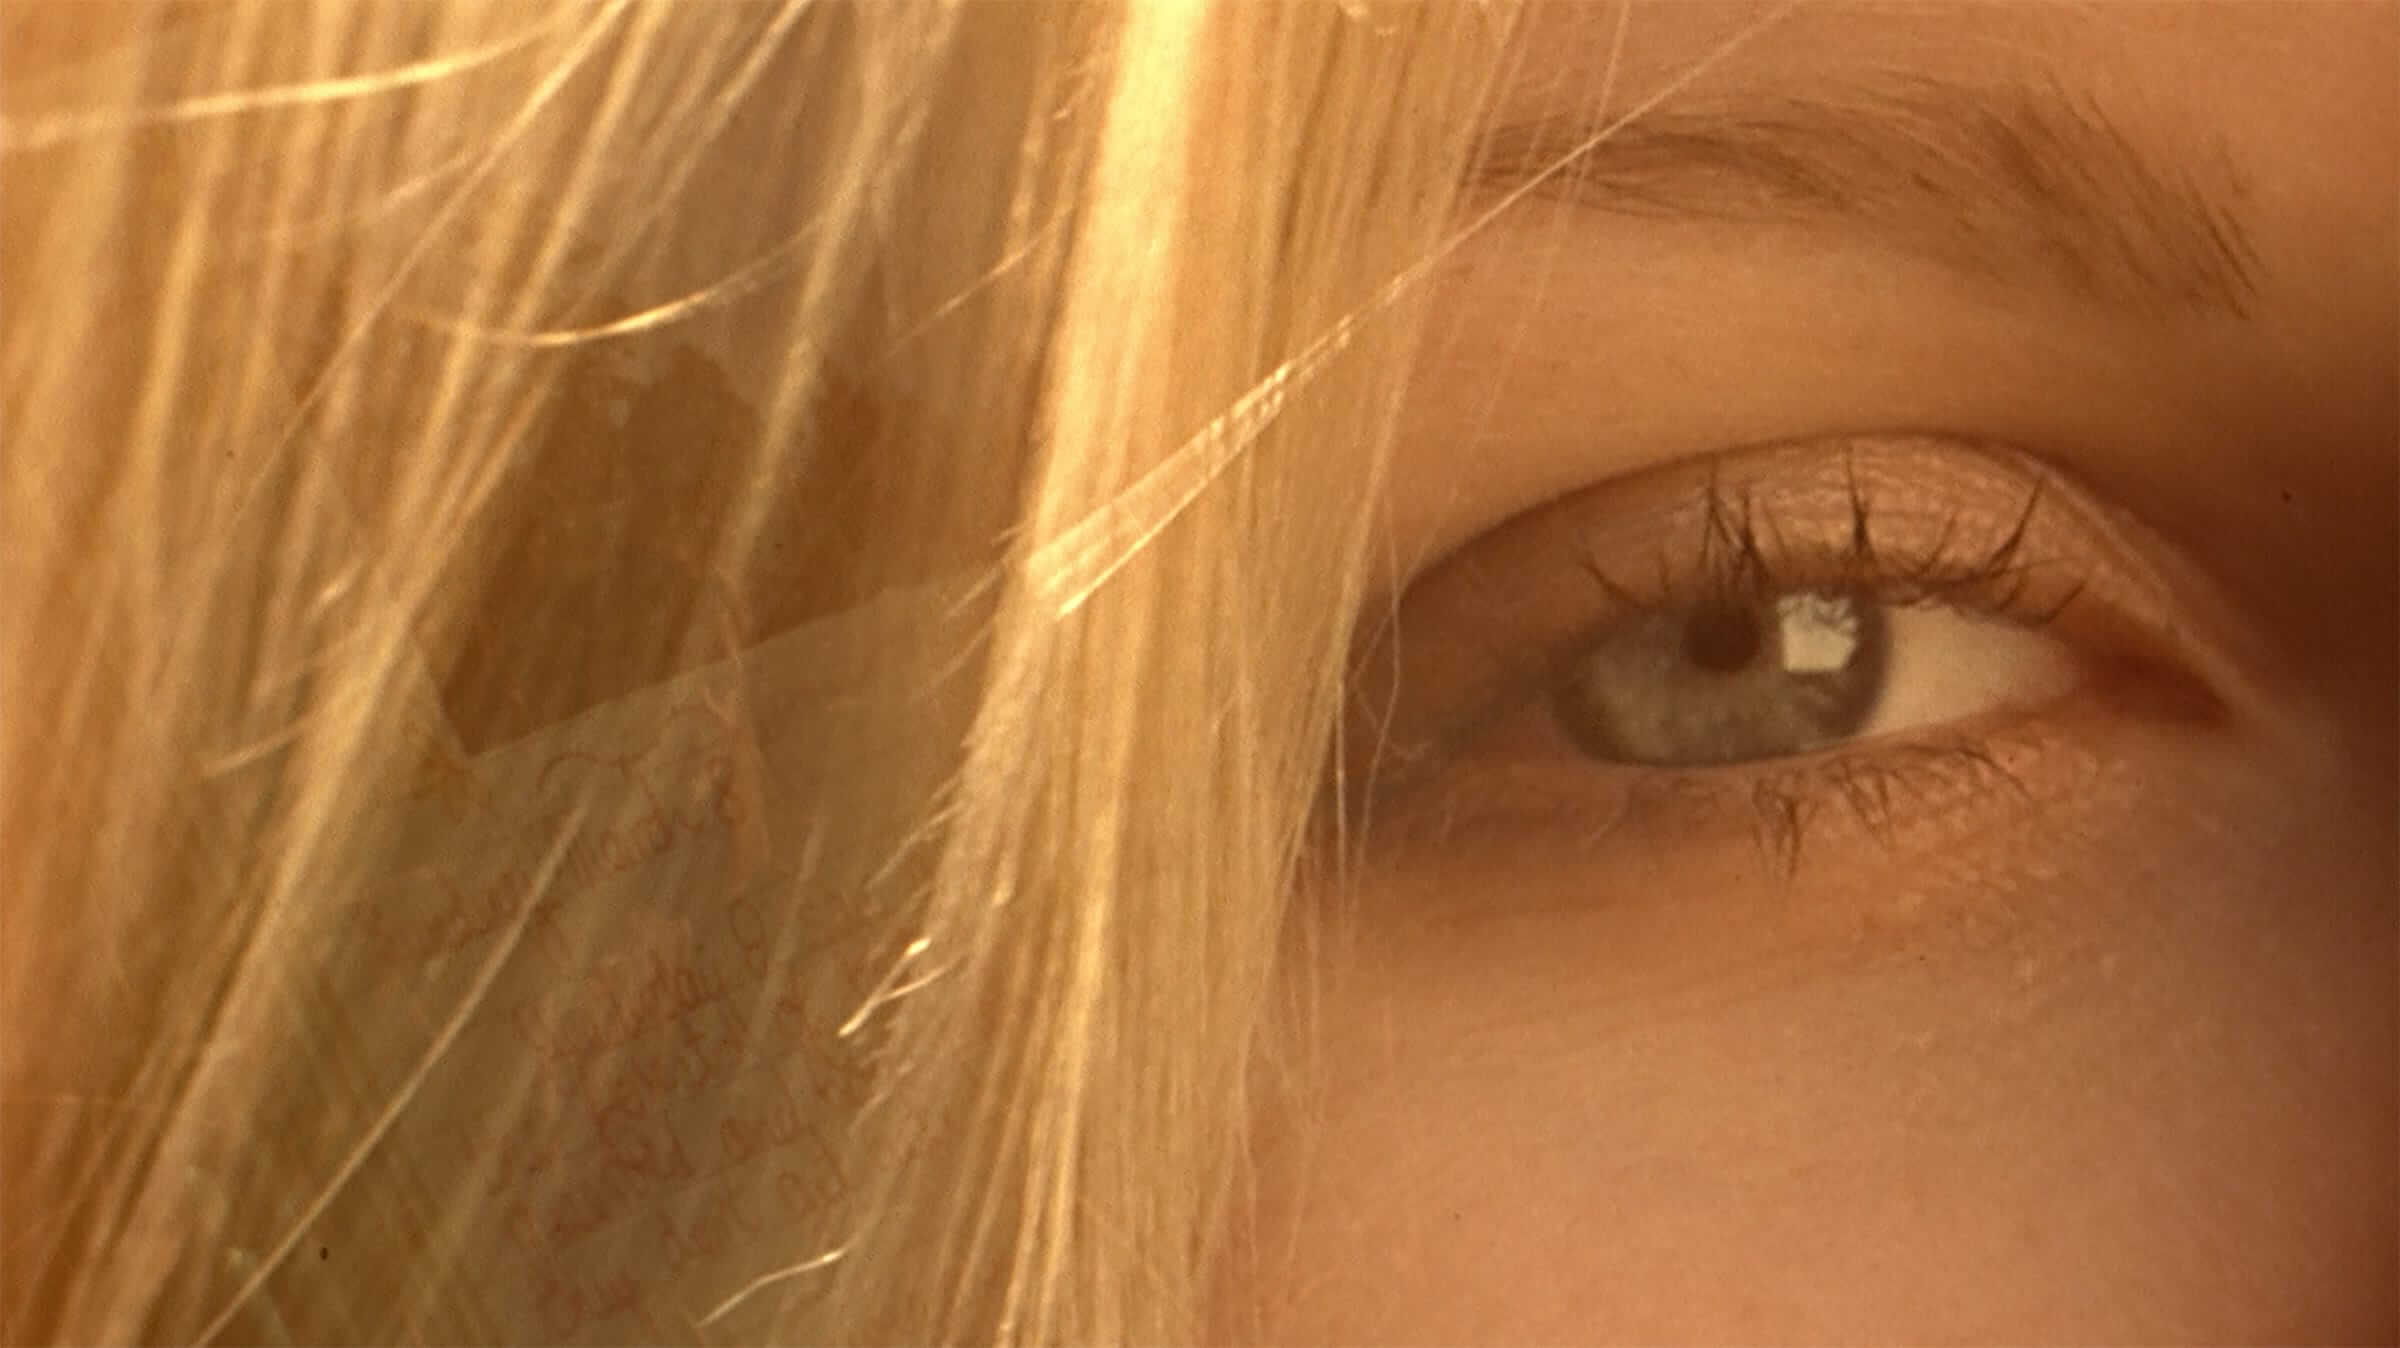 Still from The Virgin Suicides, with cinematographer Ed Lachman.